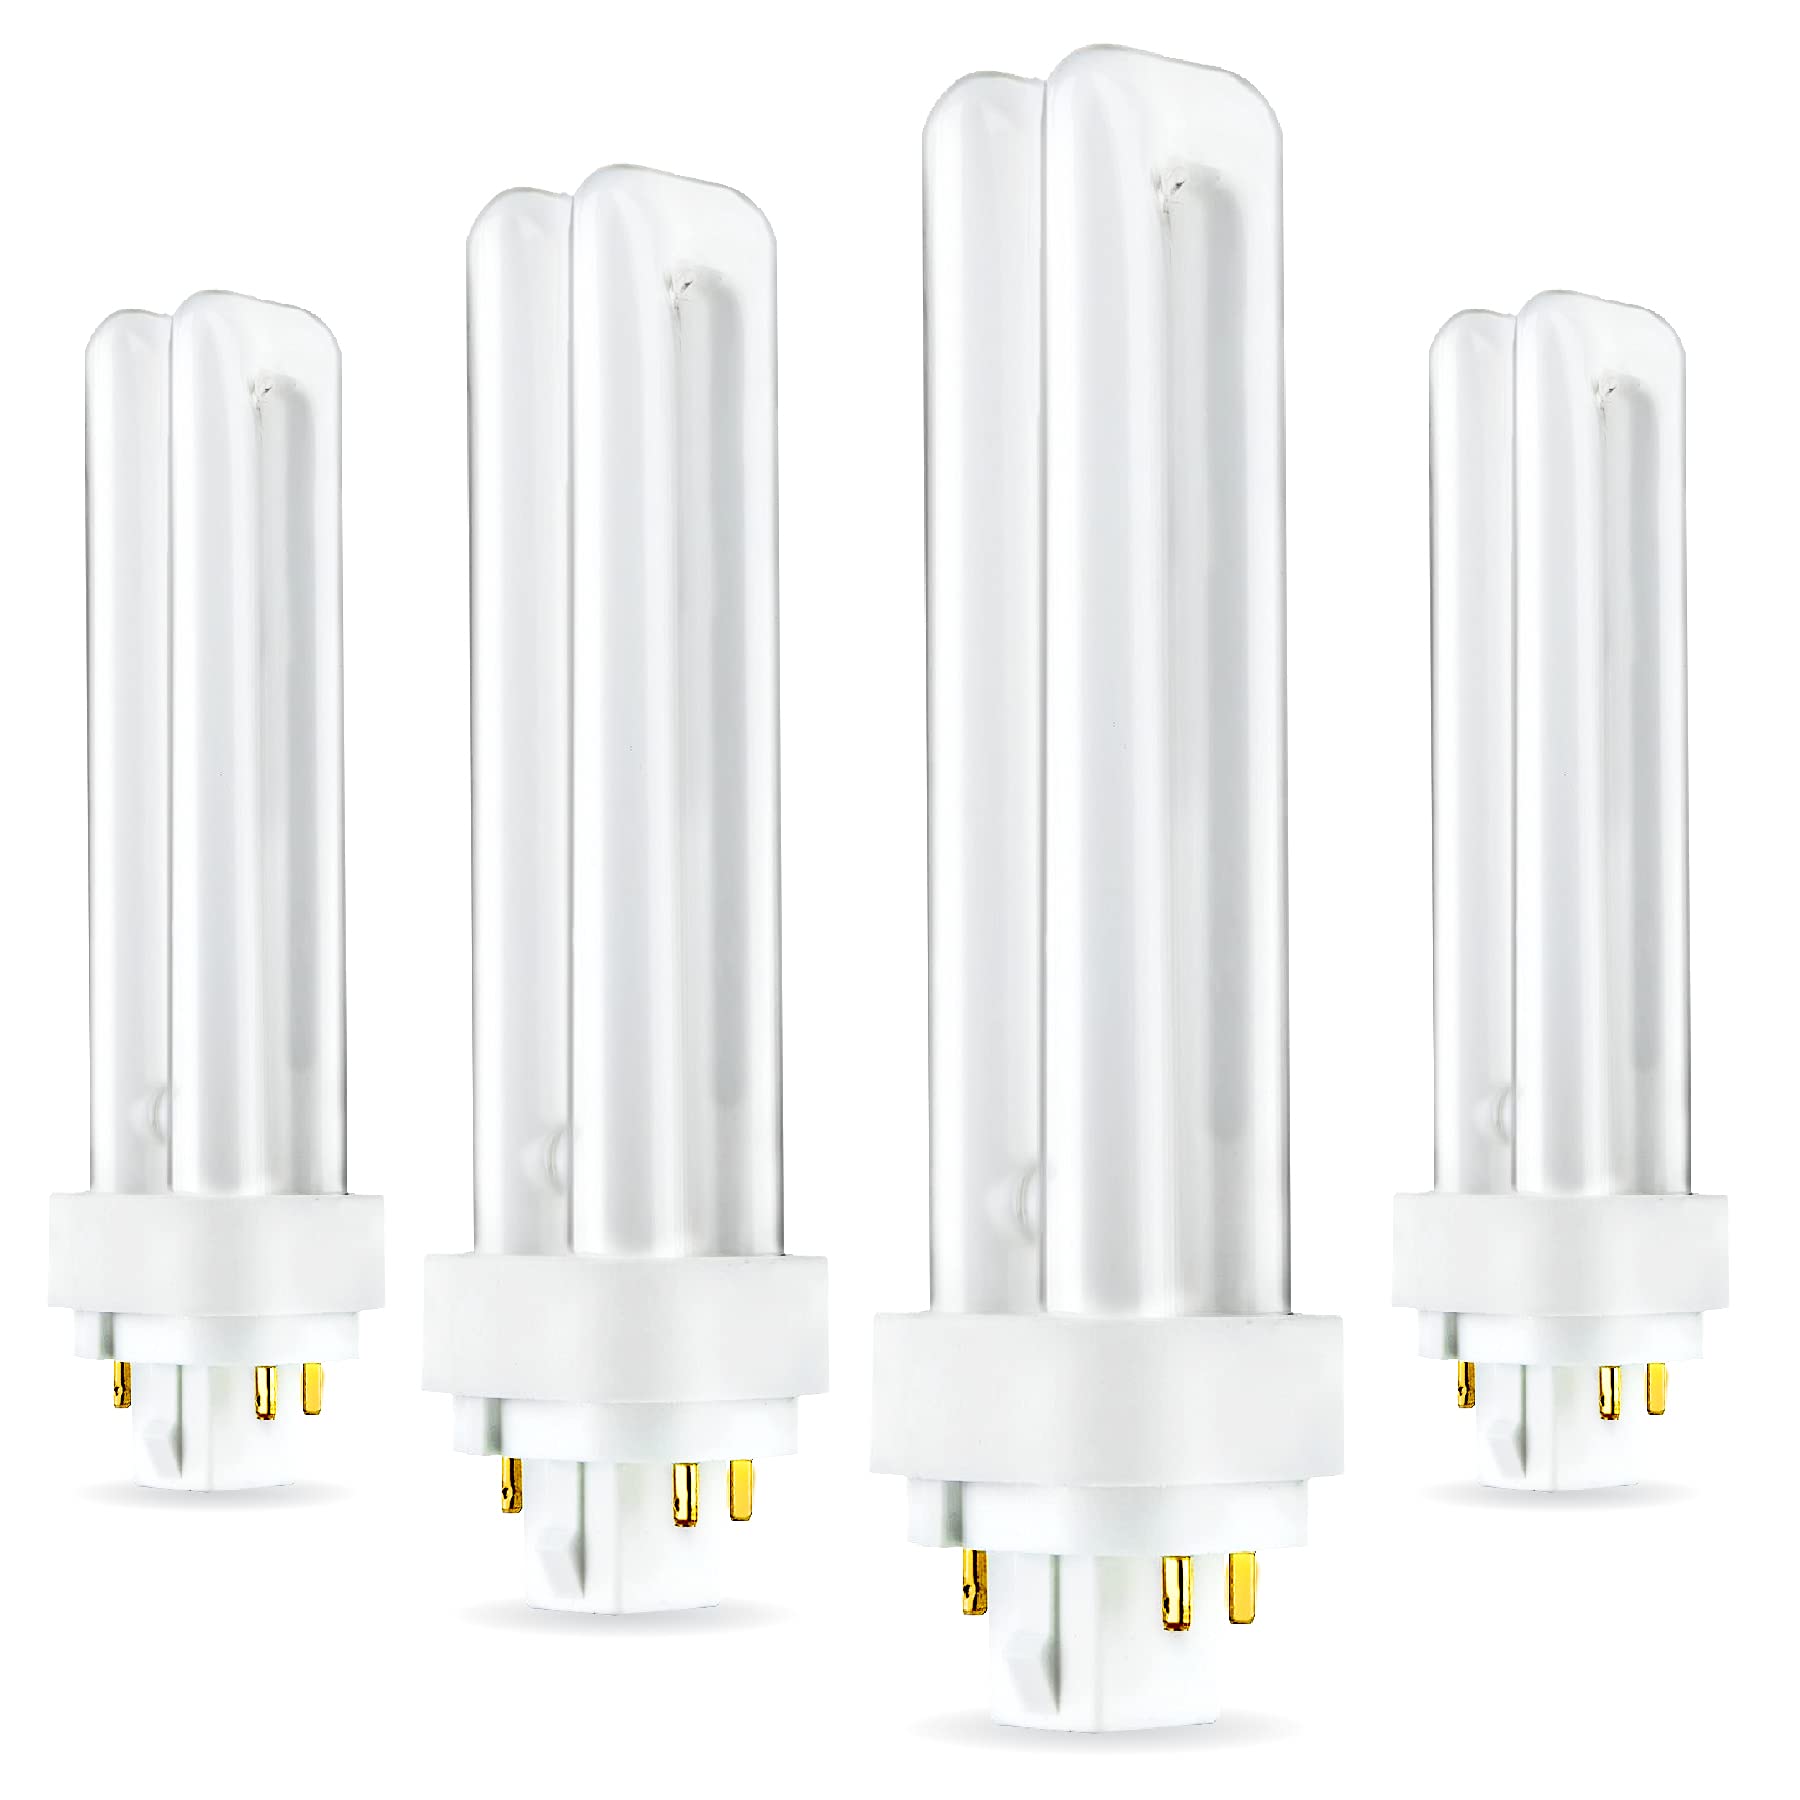 (4 Pack) PLC-18W 827, 4 Pin G24q-2, 18 Watt Double Tube, Compact Fluorescent Light Bulb, Replaces Sylvania 20683 and Philips 38329-9 - PL-C 18W/827/4P/ALTO  - Very Good